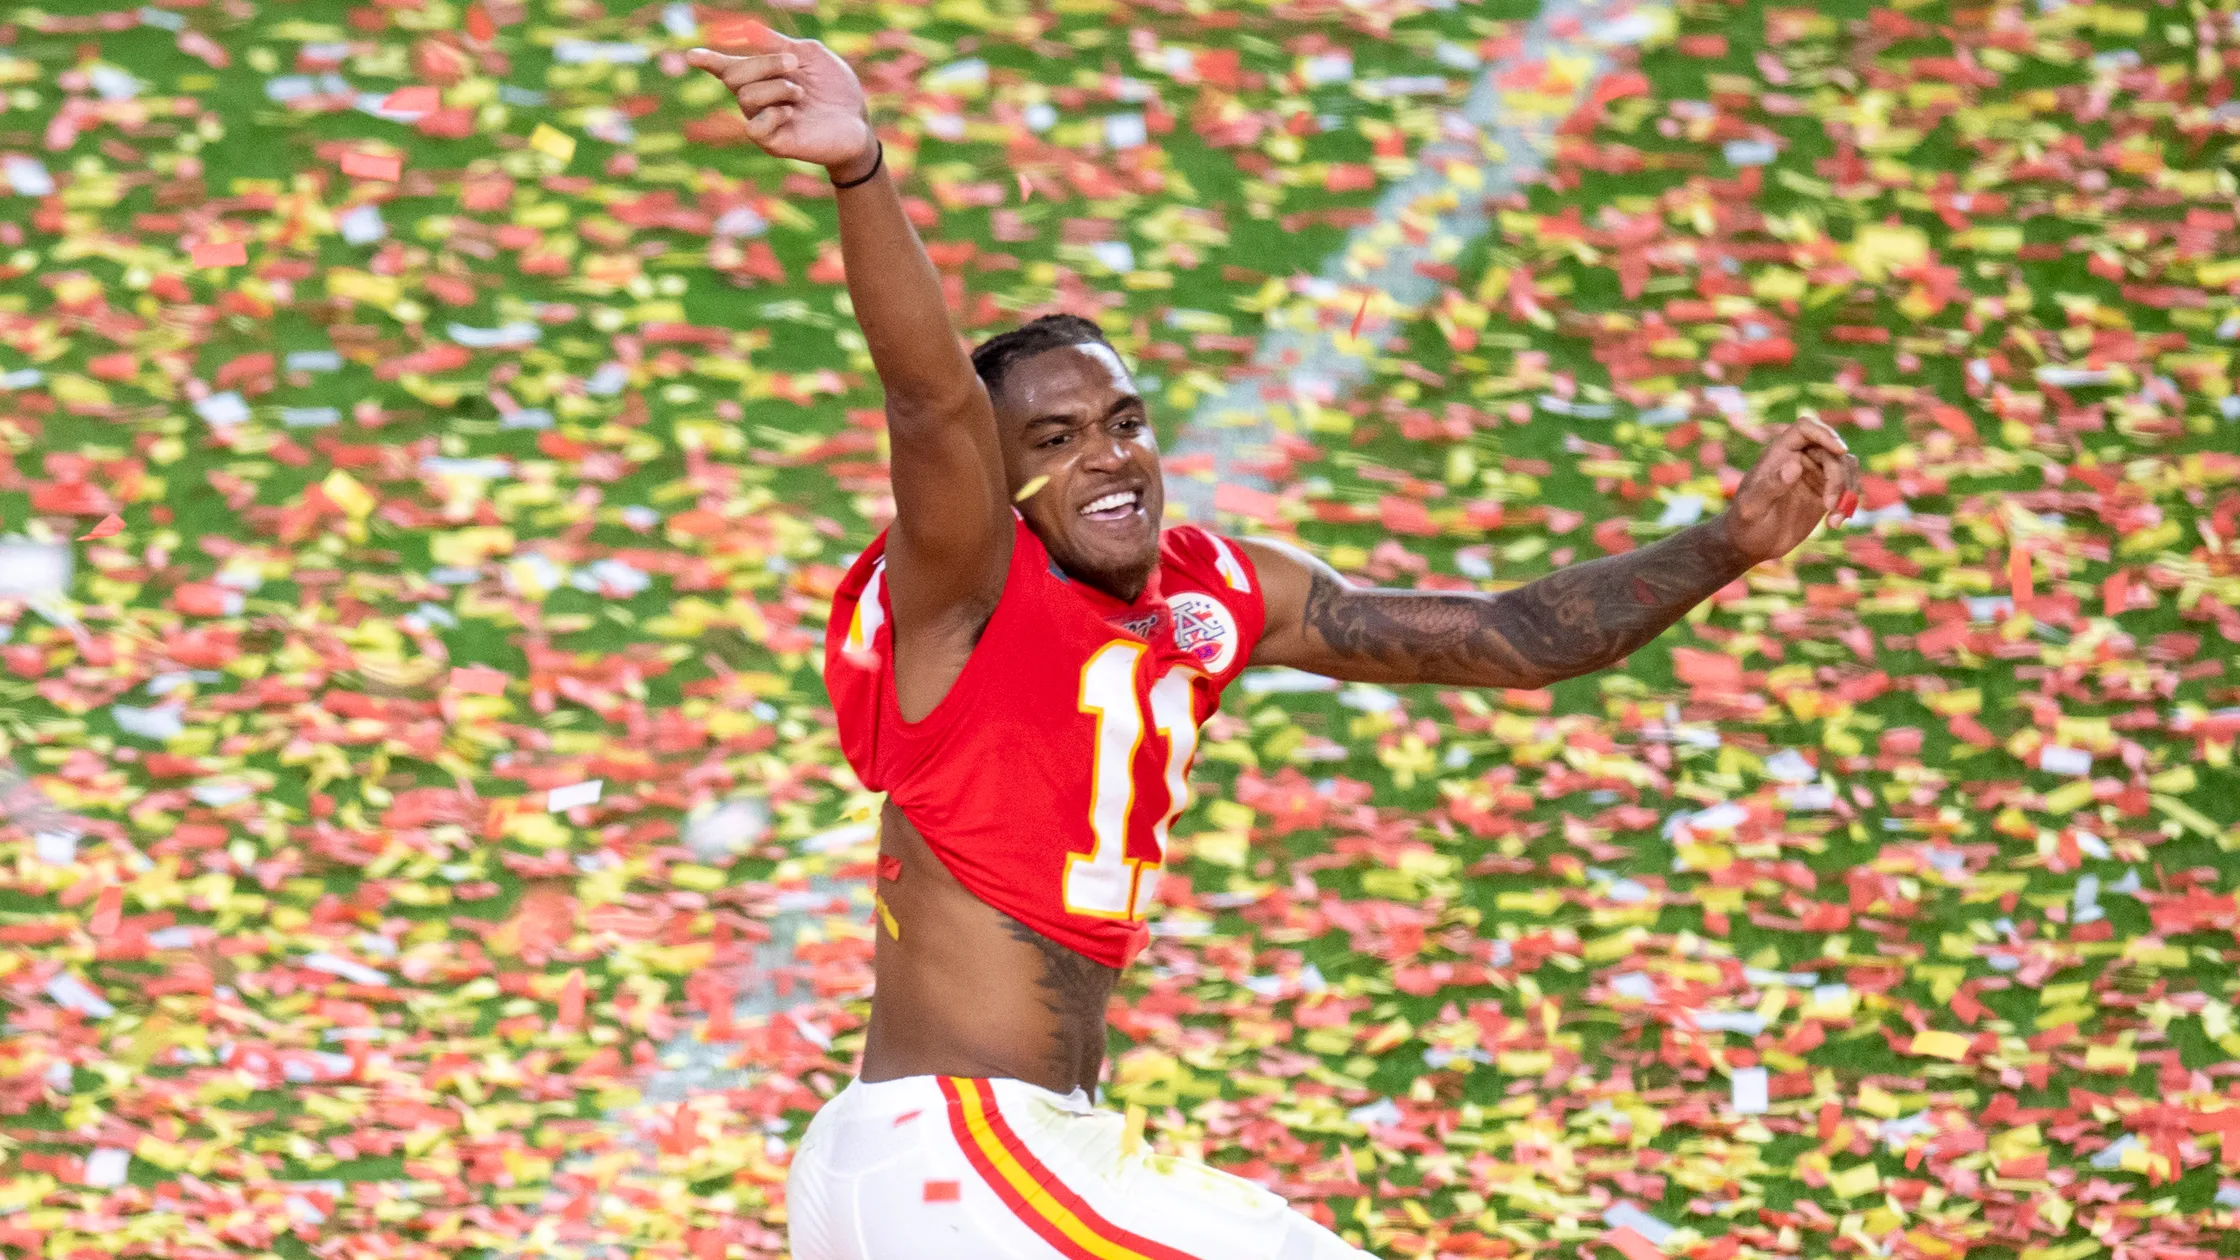 An American football player in a red and white jersey celebrates on a confetti-covered field. He is smiling and has one arm raised while he runs, with colorful confetti falling around him.